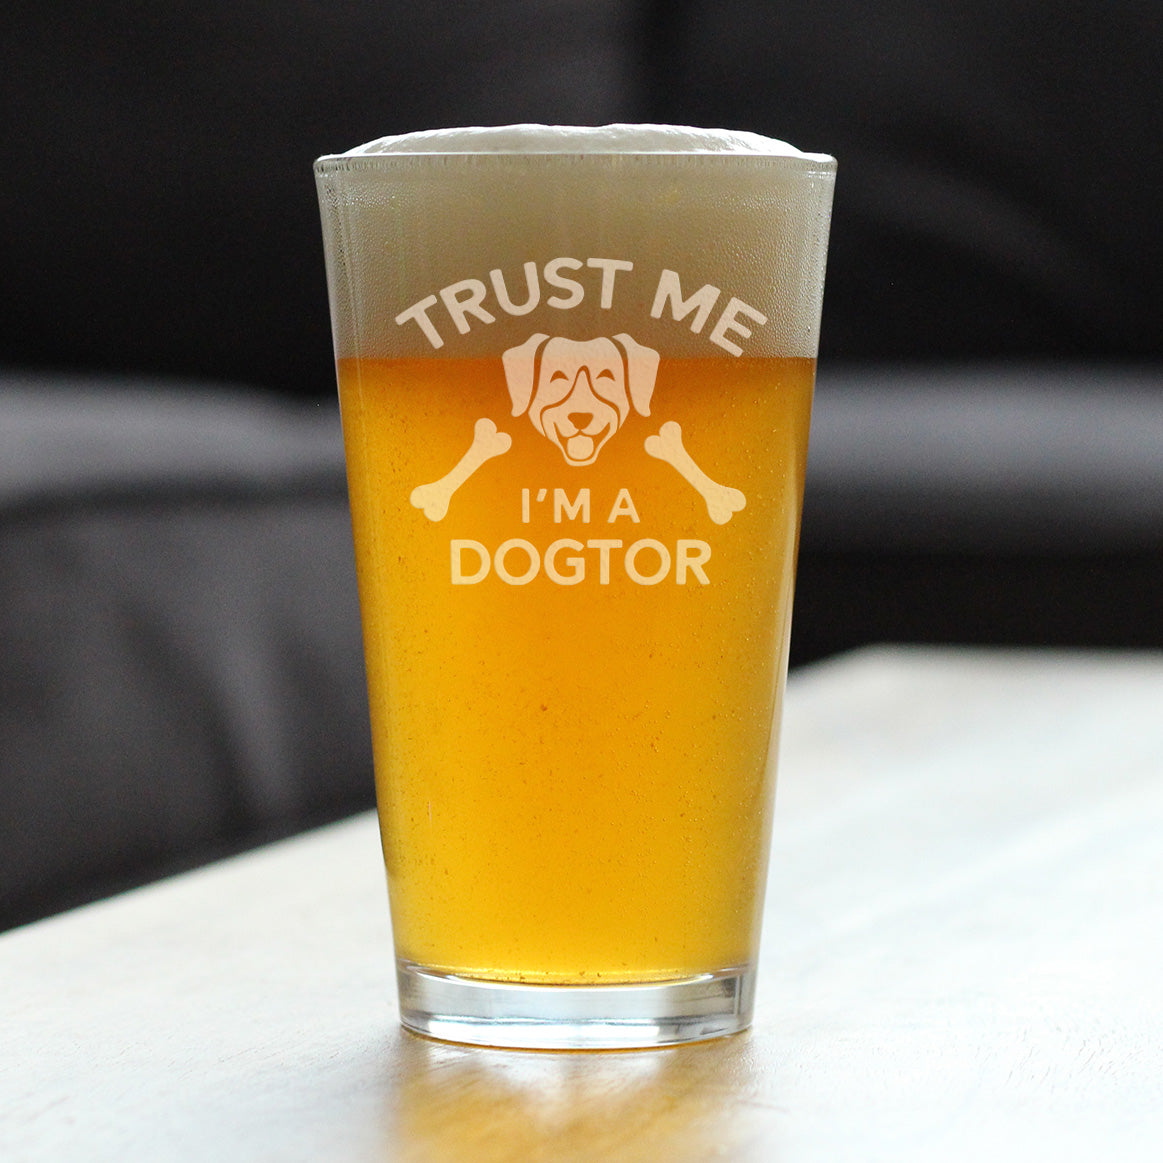 Dogtor - Pint Glass for Beer - Funny Dog Gifts for Veterinarians and Vet Techs - 16 oz Glasses